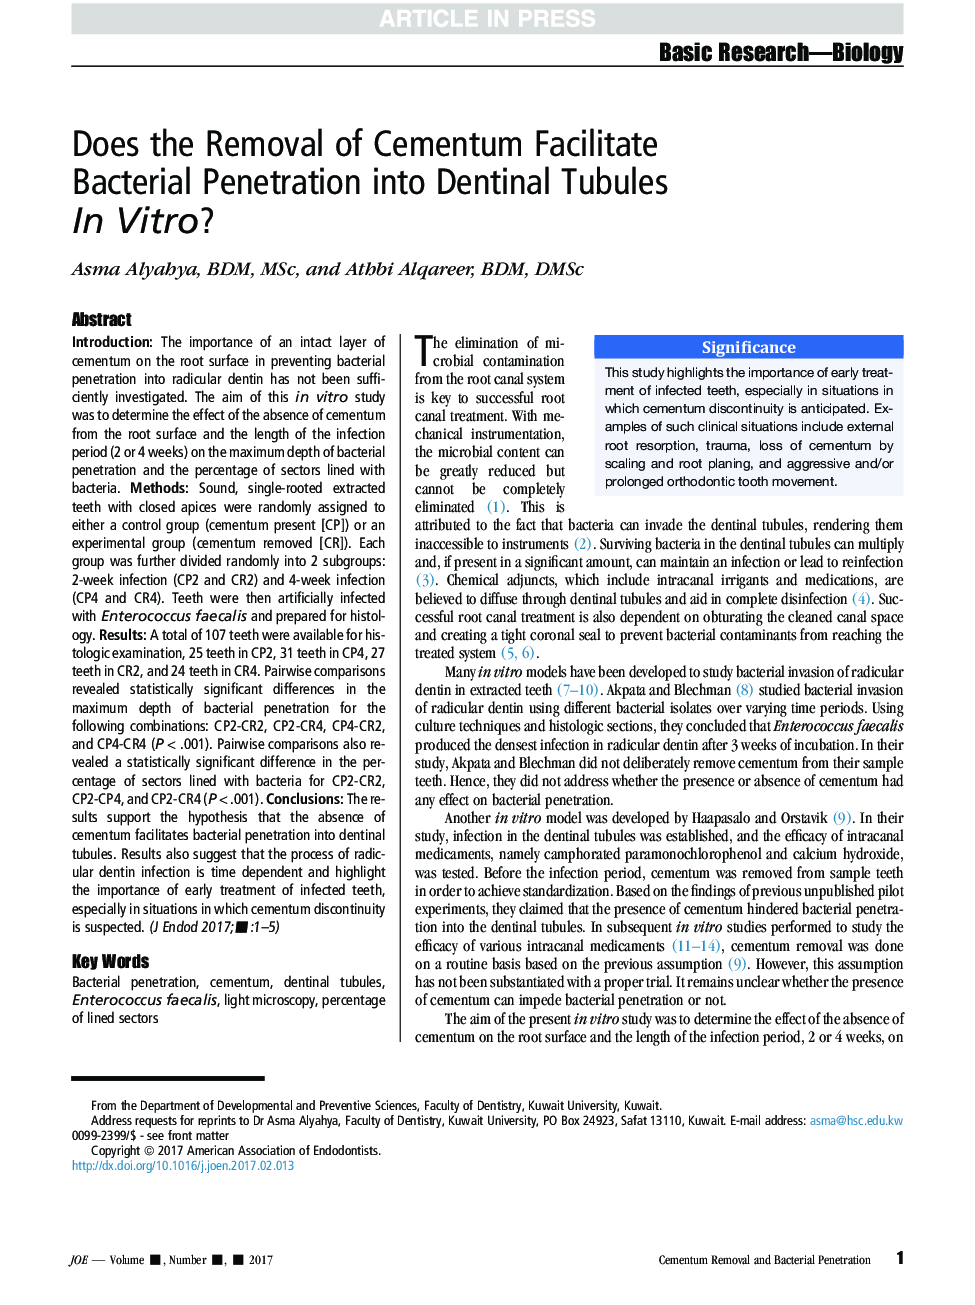 Does the Removal of Cementum Facilitate Bacterial Penetration into Dentinal Tubules InÂ Vitro?